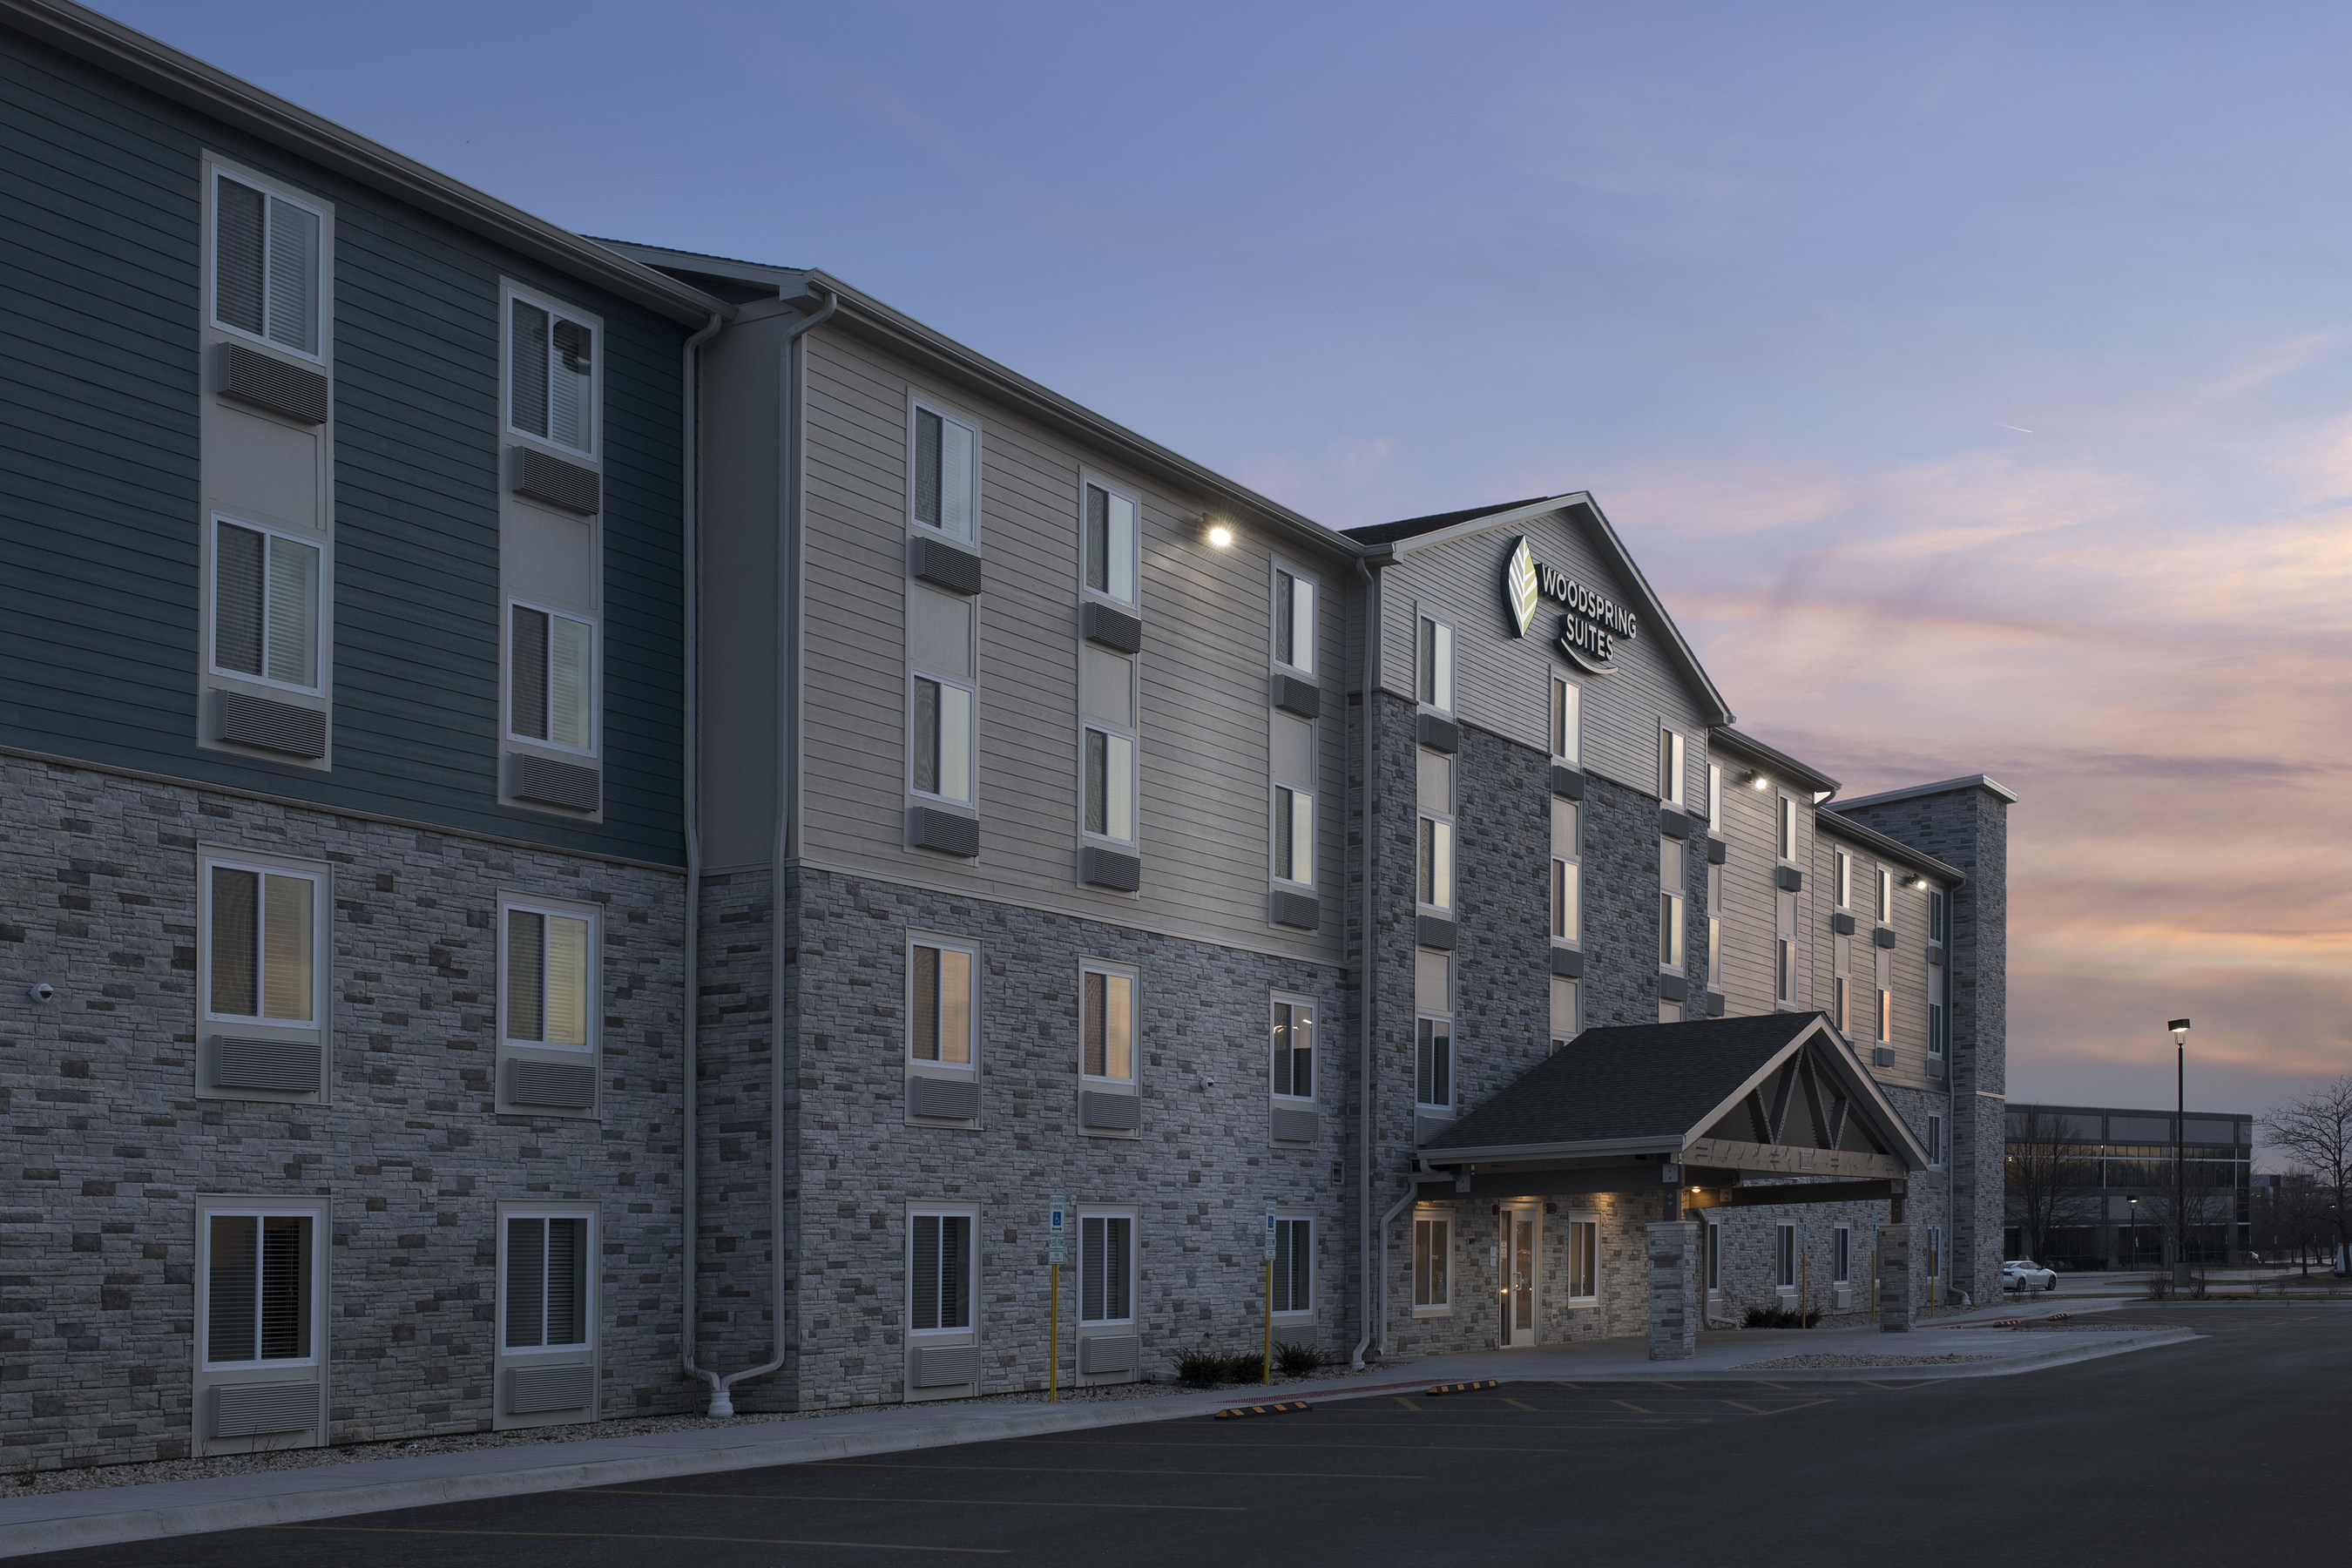 The WoodSpring Suites brand now has more than 130 properties in its development pipeline and more than 245 open hotels